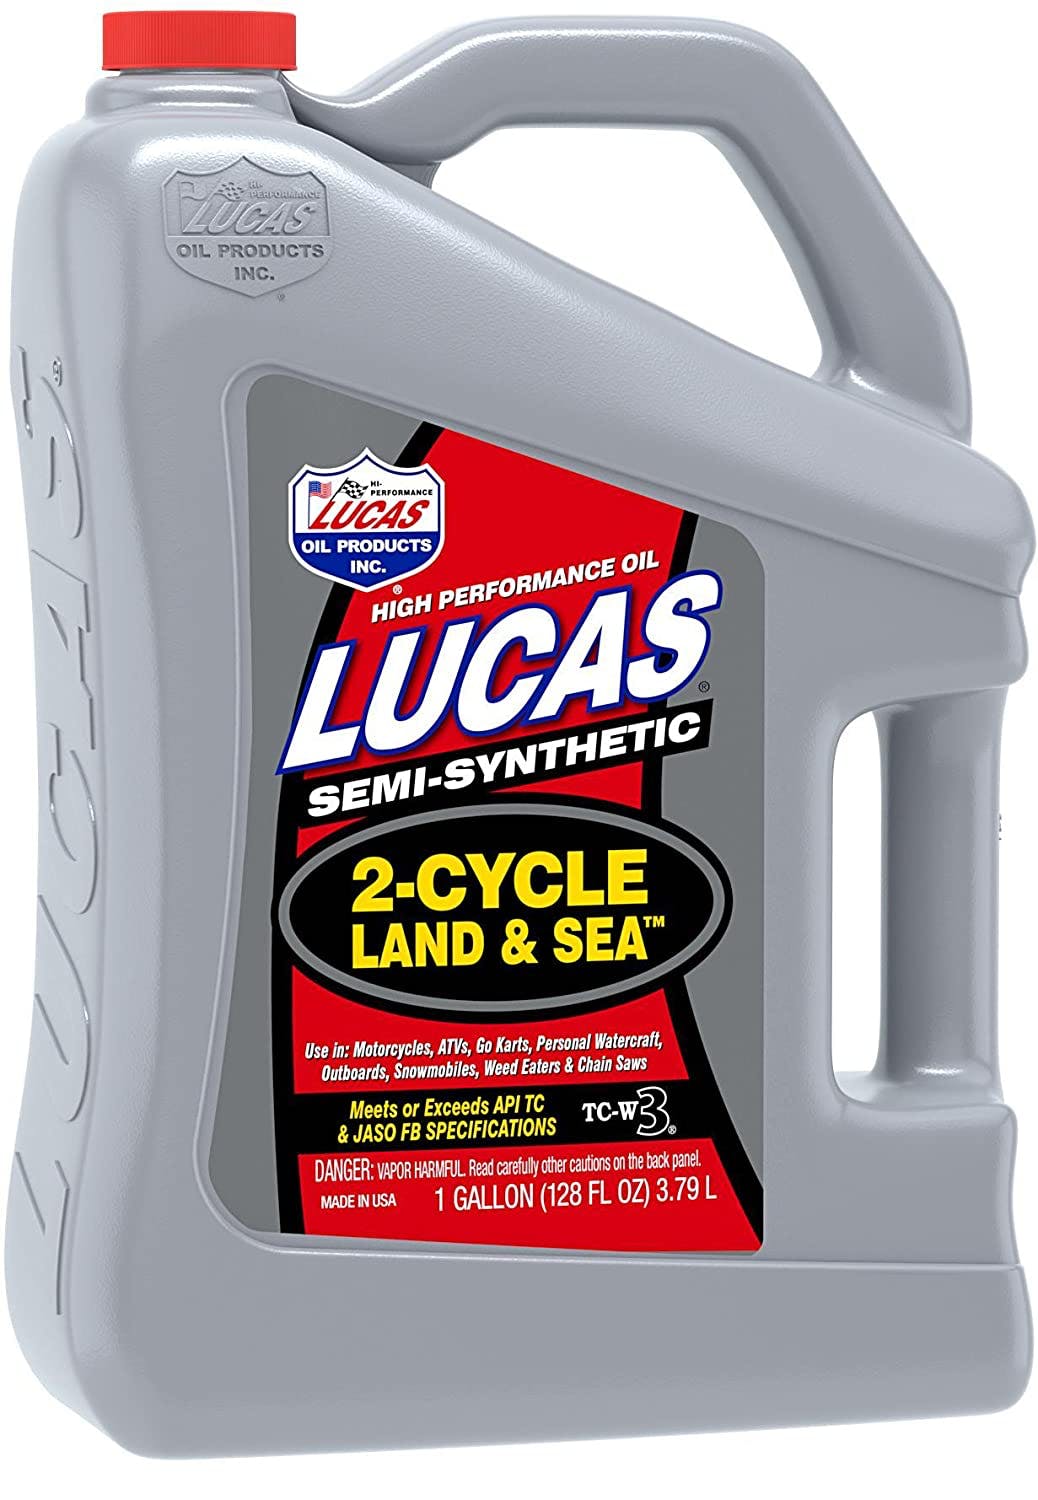 Lucas OIL Semi-Synthetic 2-Cycle Land and Sea Oil 10469